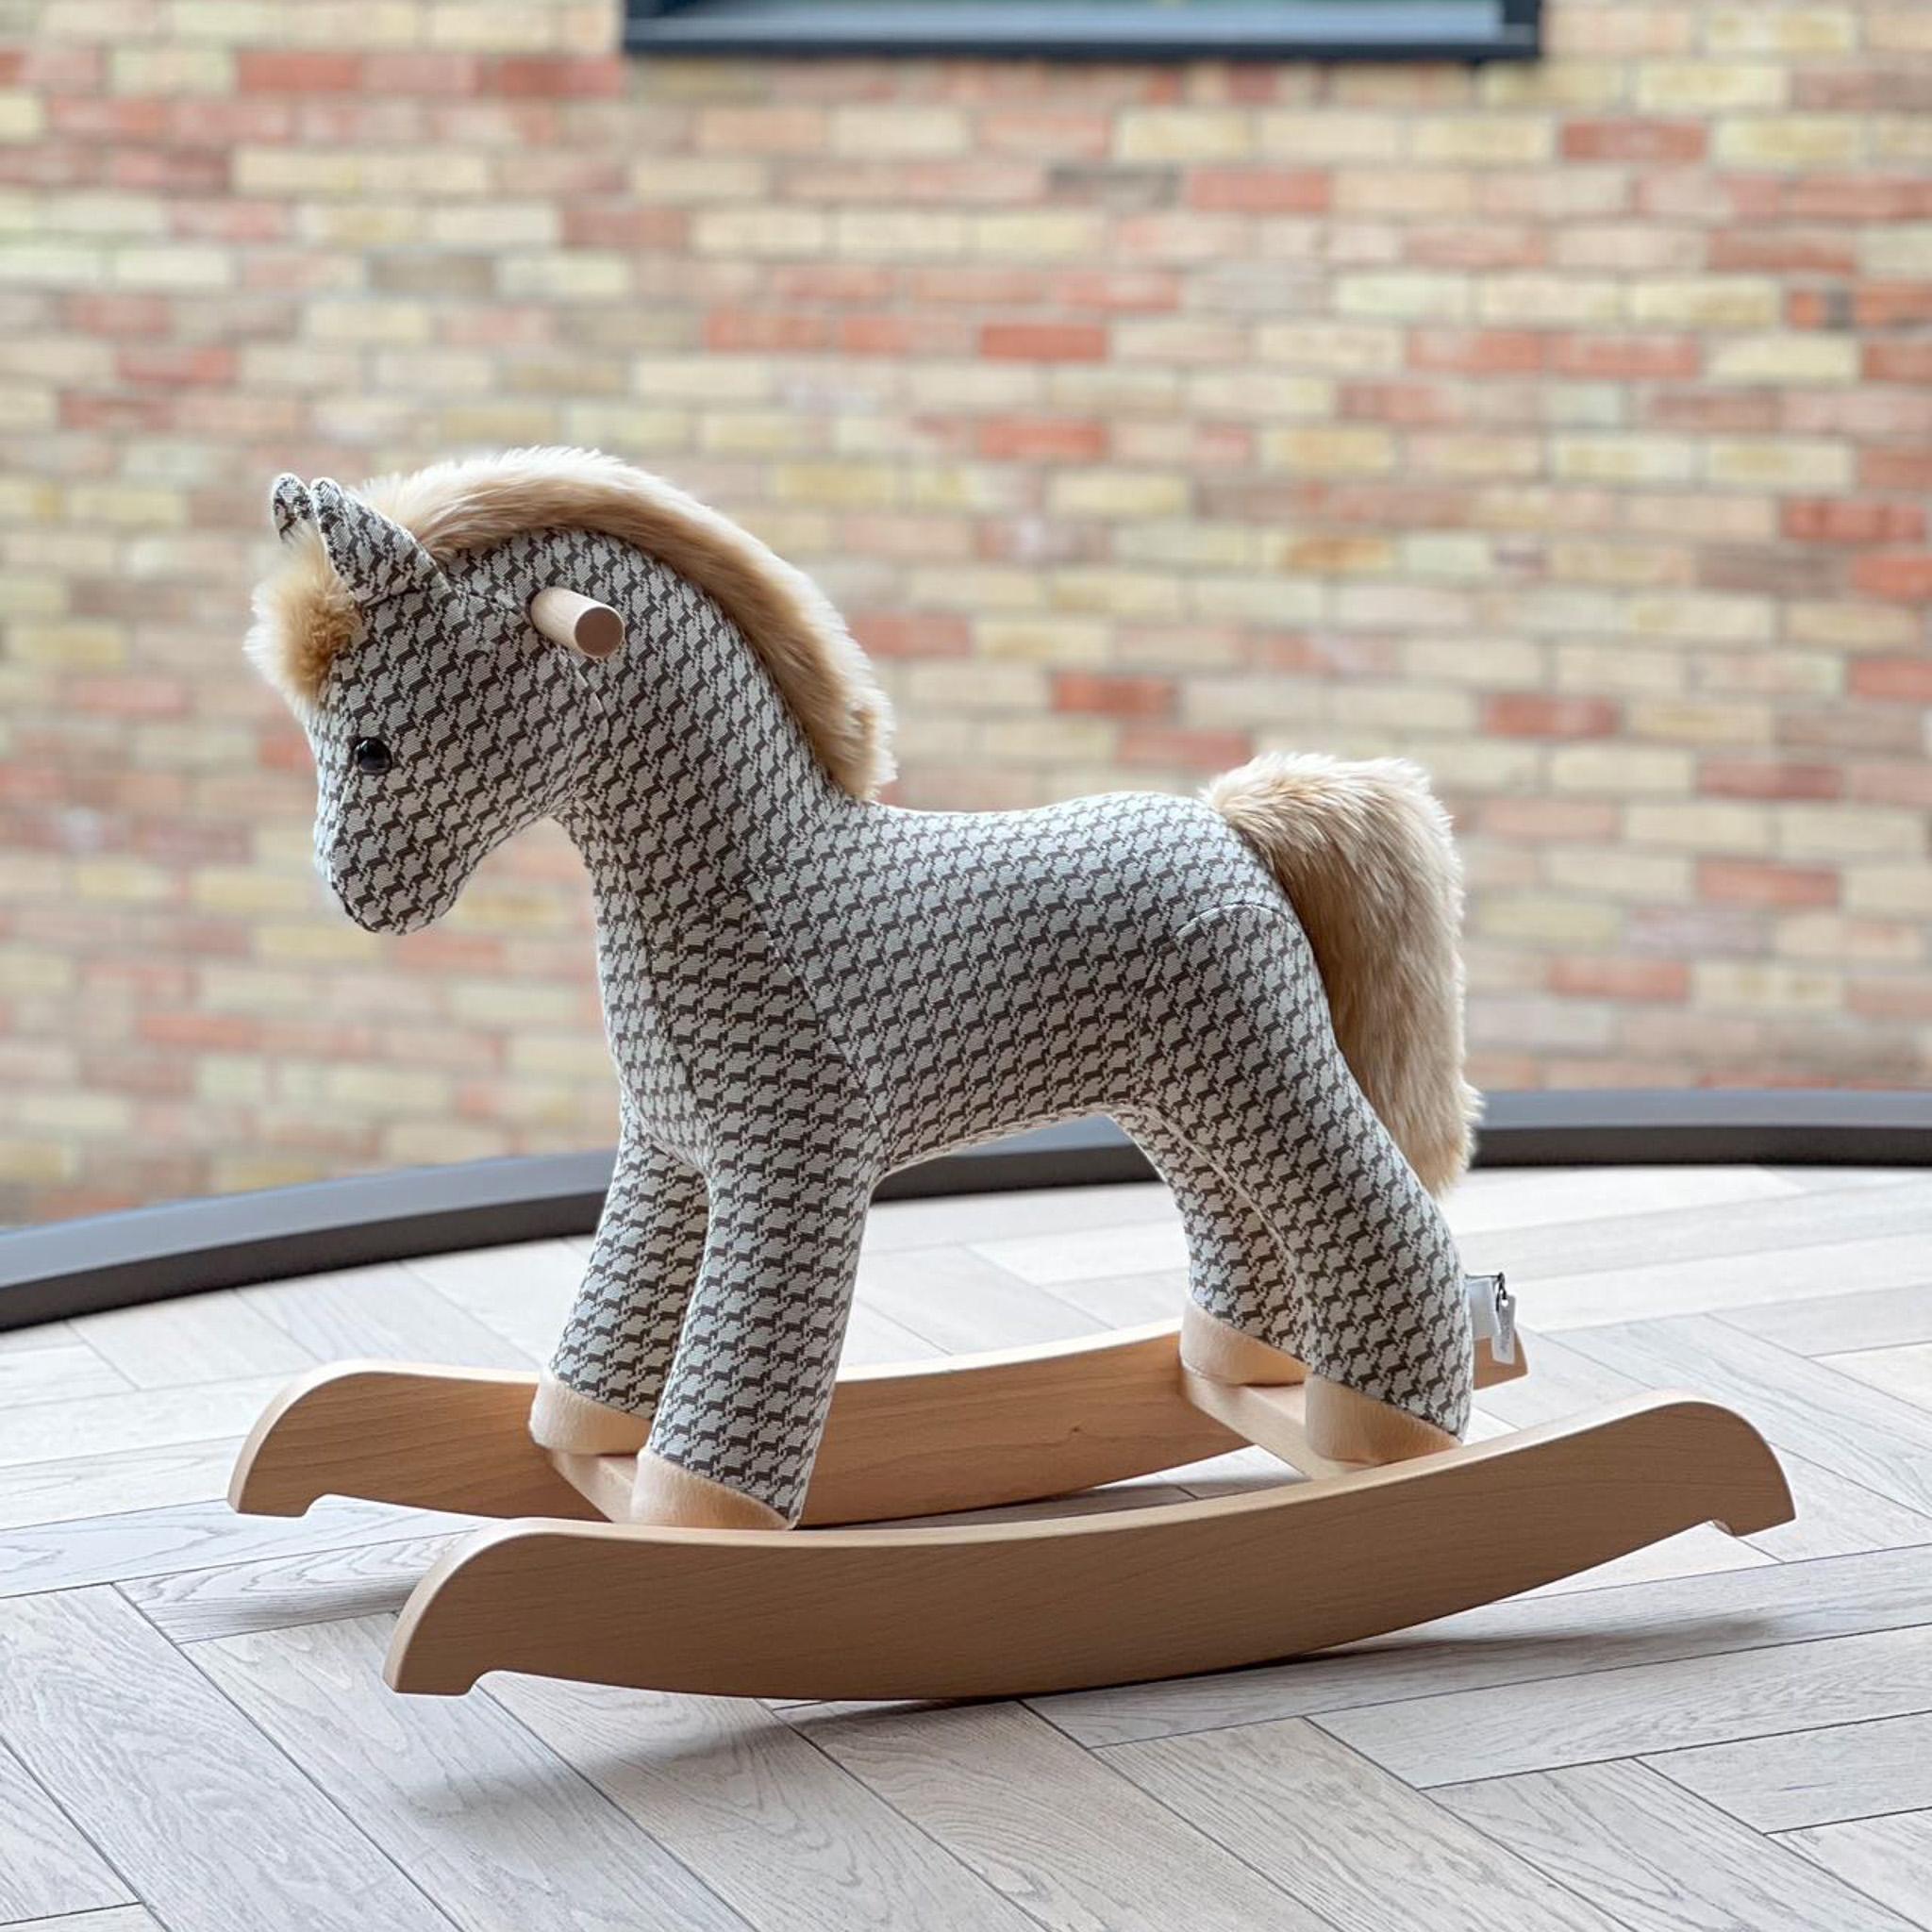 Shop this beautiful Hermes Hermy Cheval Pixel Rocking Horse in Cheval Pixel Étoupe. It is handcrafted from Cotton, Acrylic fur and Beachwood. This is the perfect addition to any nursery or children's bedroom, in a perfect neutral colour way.